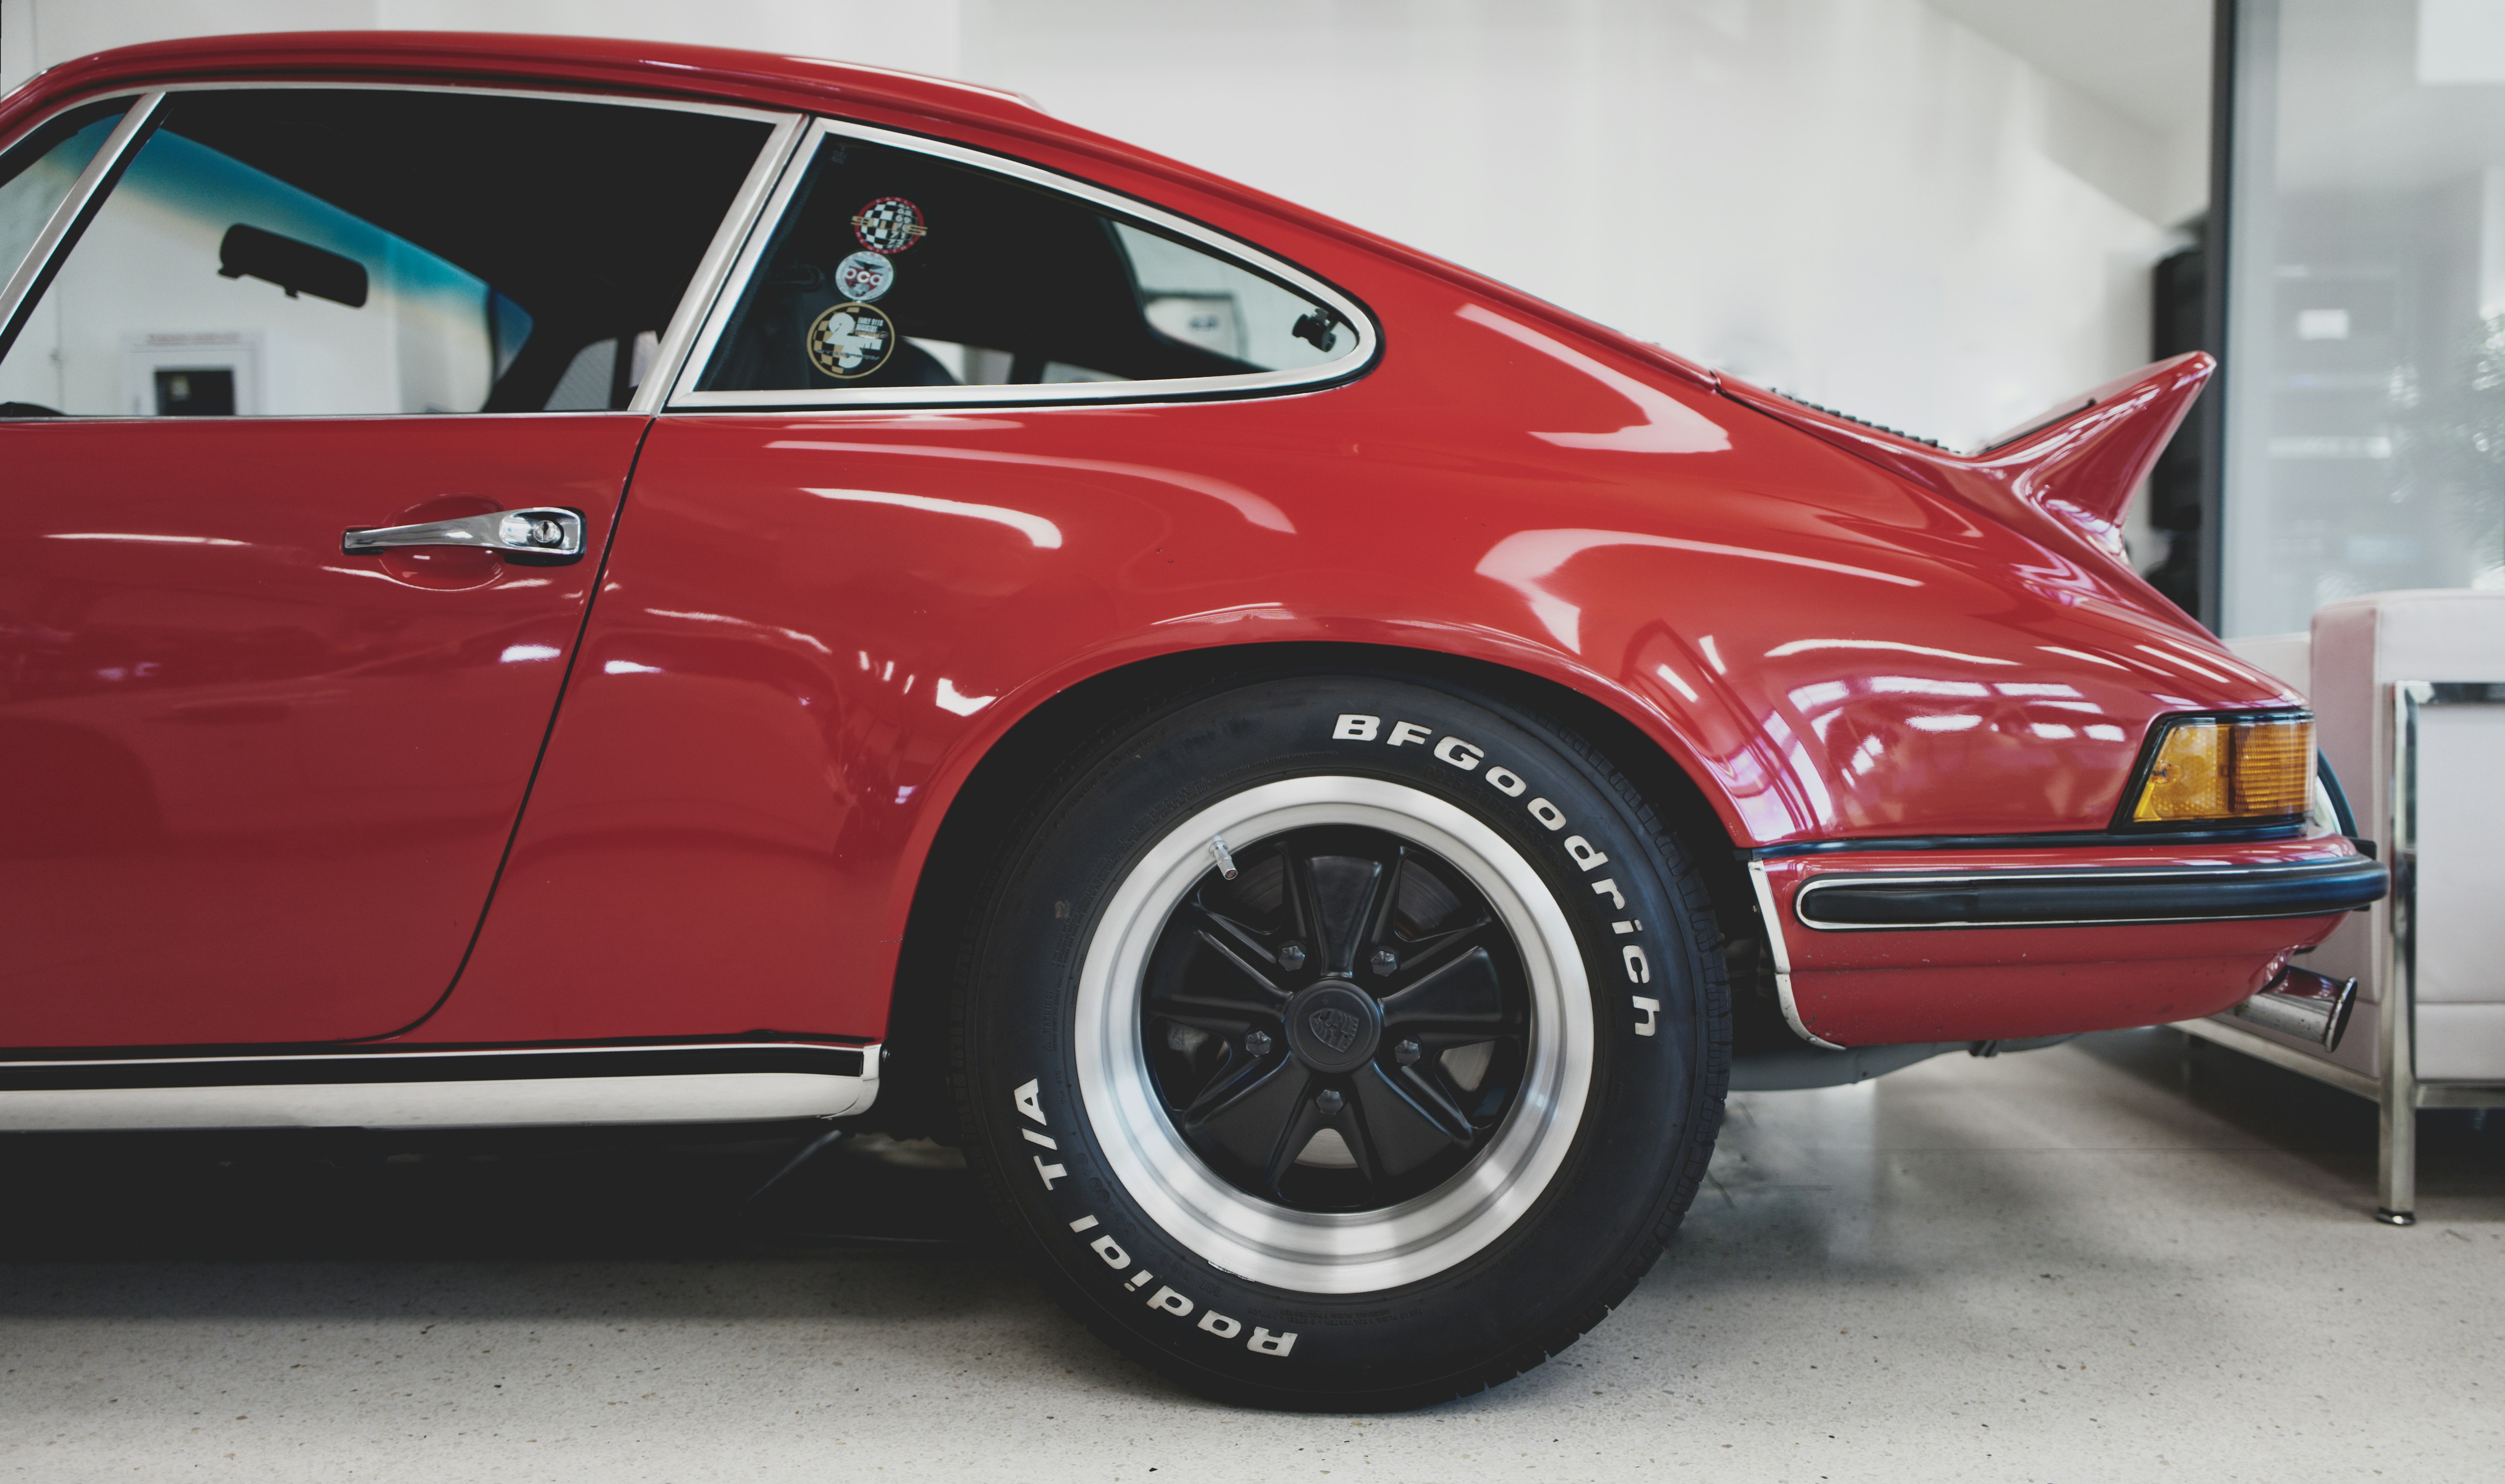 Classic Red Porsche 911 - shot at Thermal, California